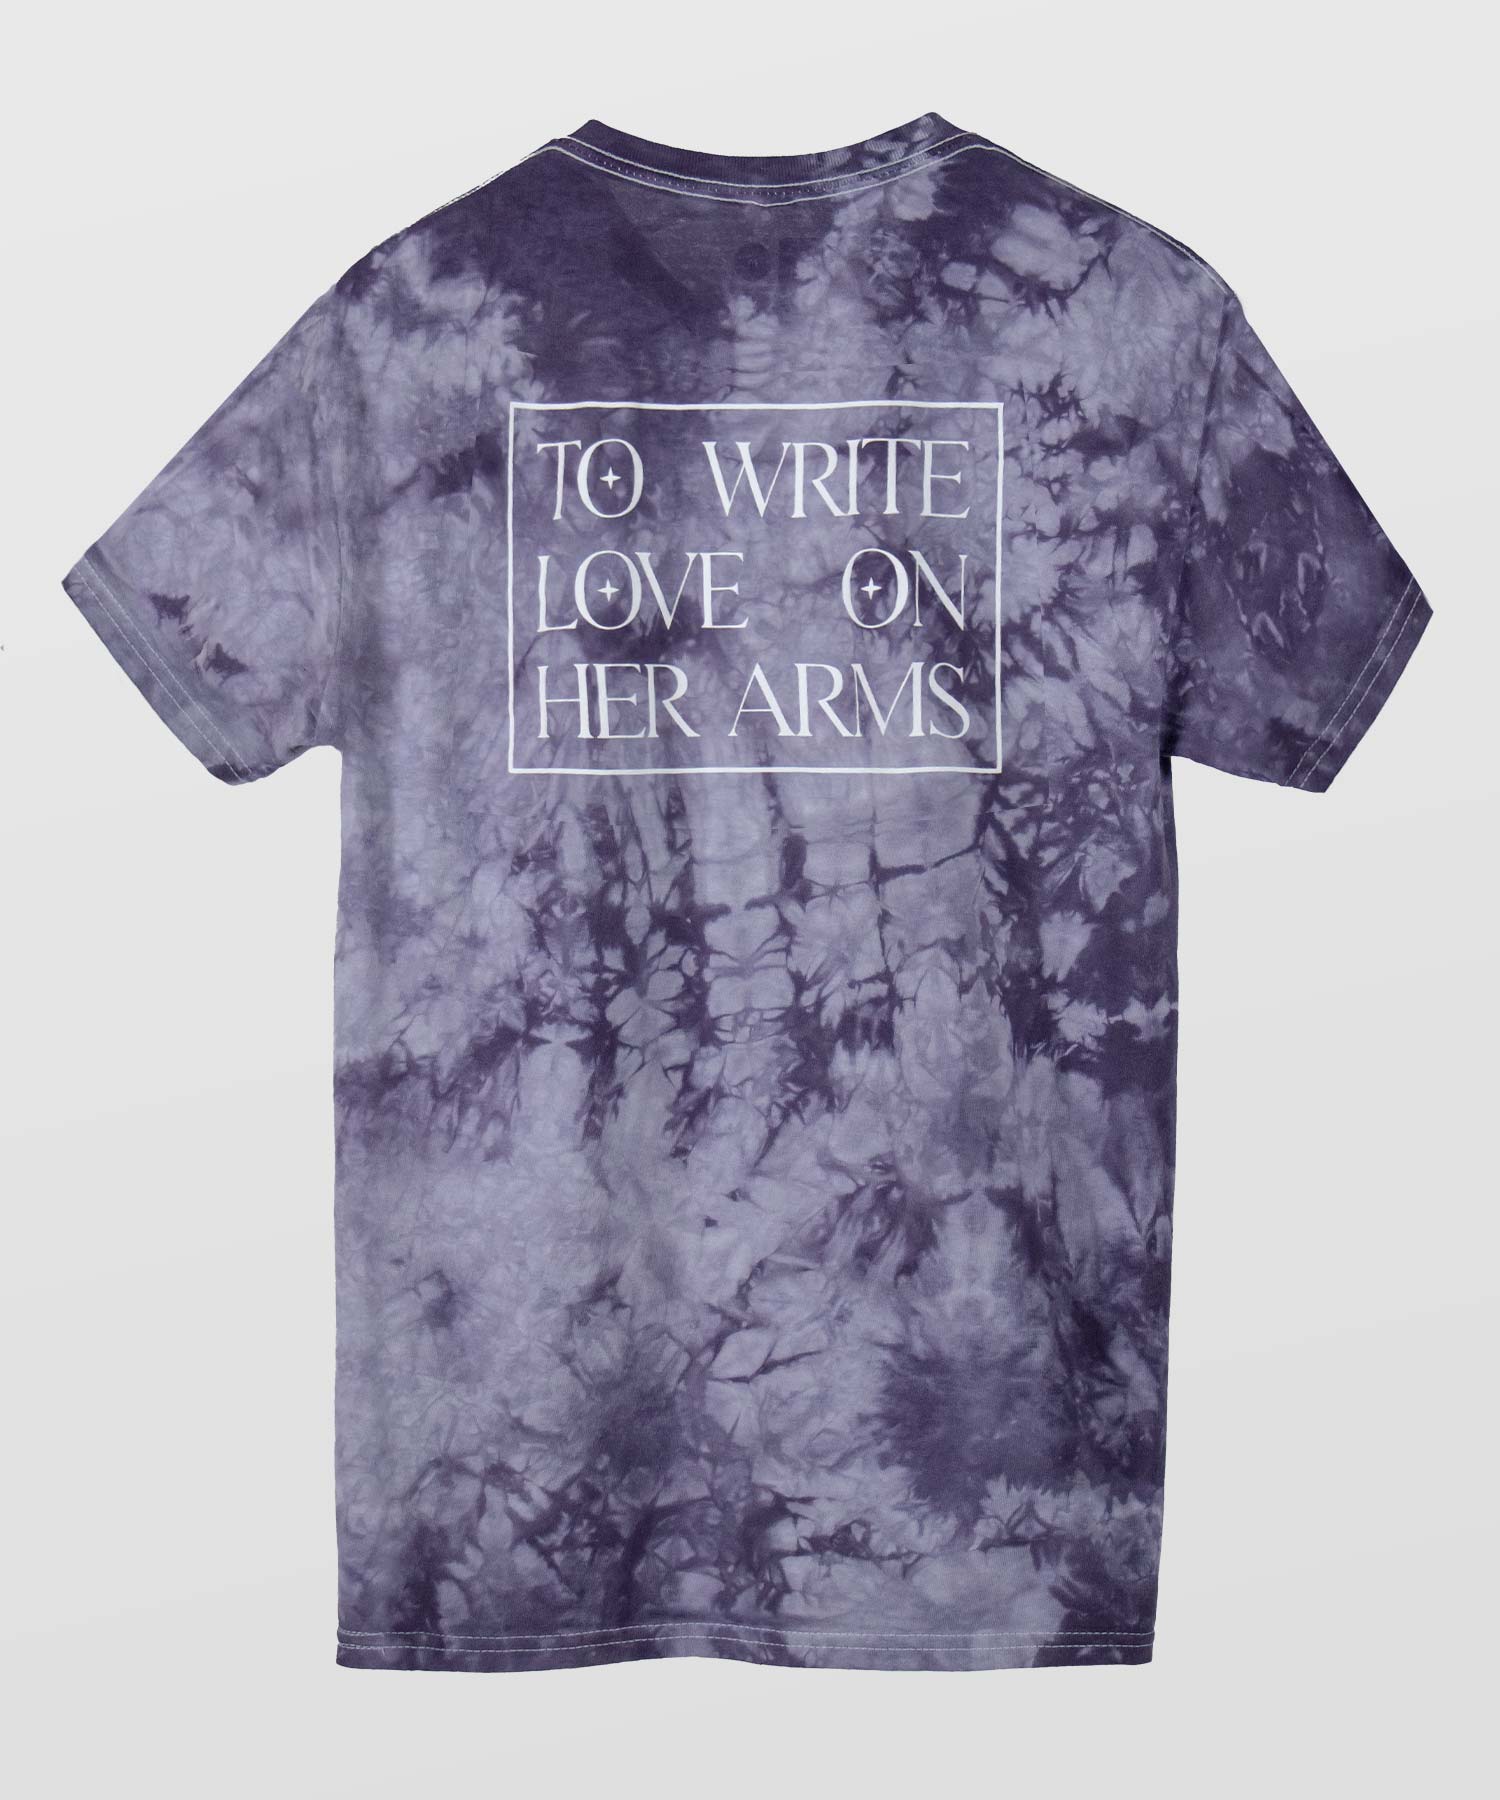 North Star Tie-Dye Shirt – To Write Love on Her Arms.